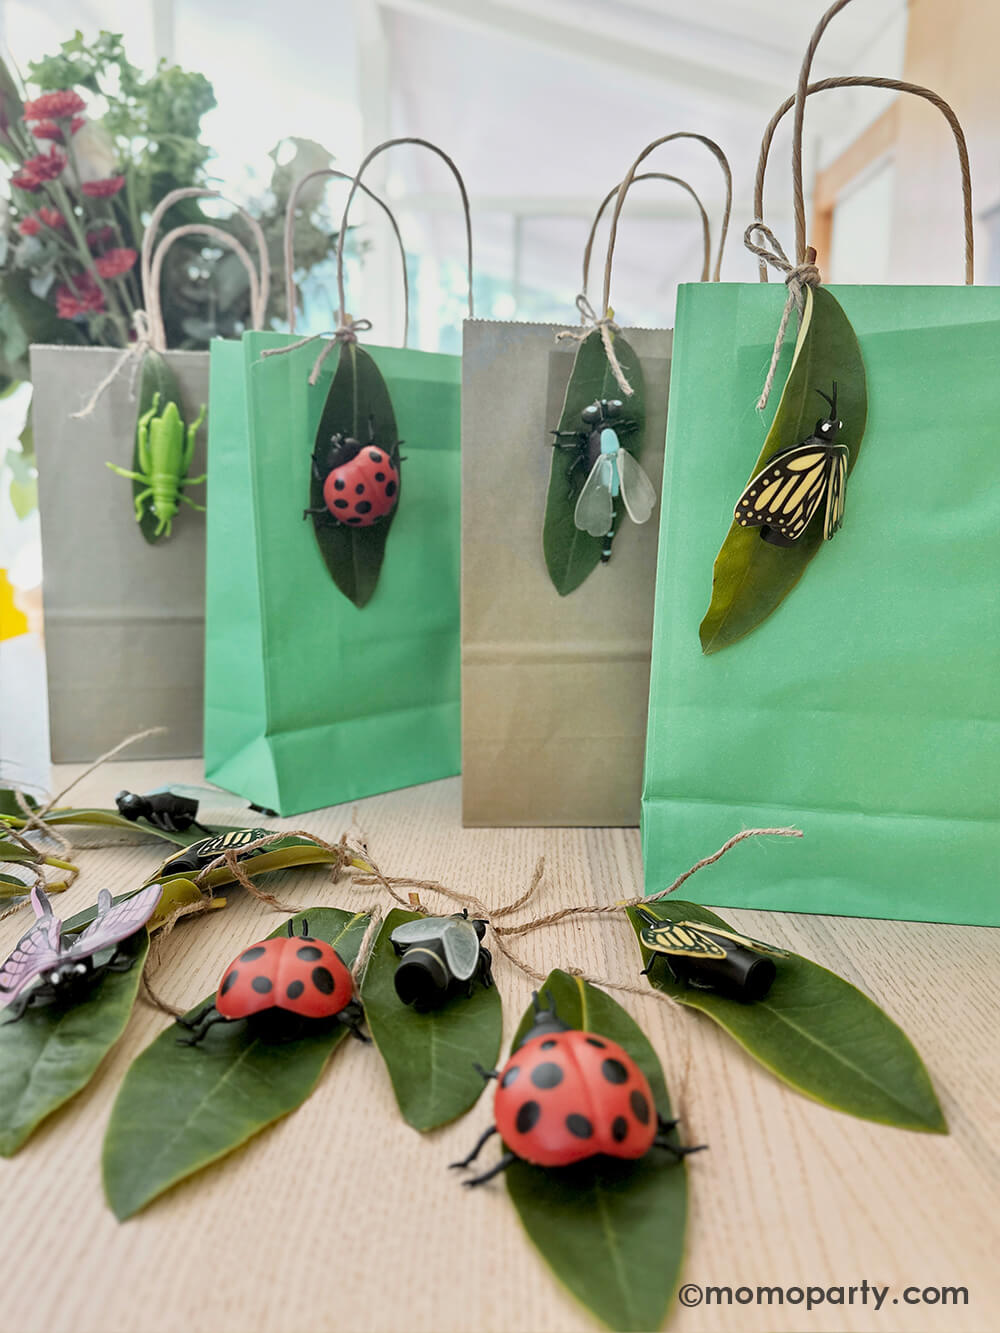 A diy project using Momo Party's various insect finger puppets and real leaves as decoration to party favor bags for kid's bug insect themed birthday party.